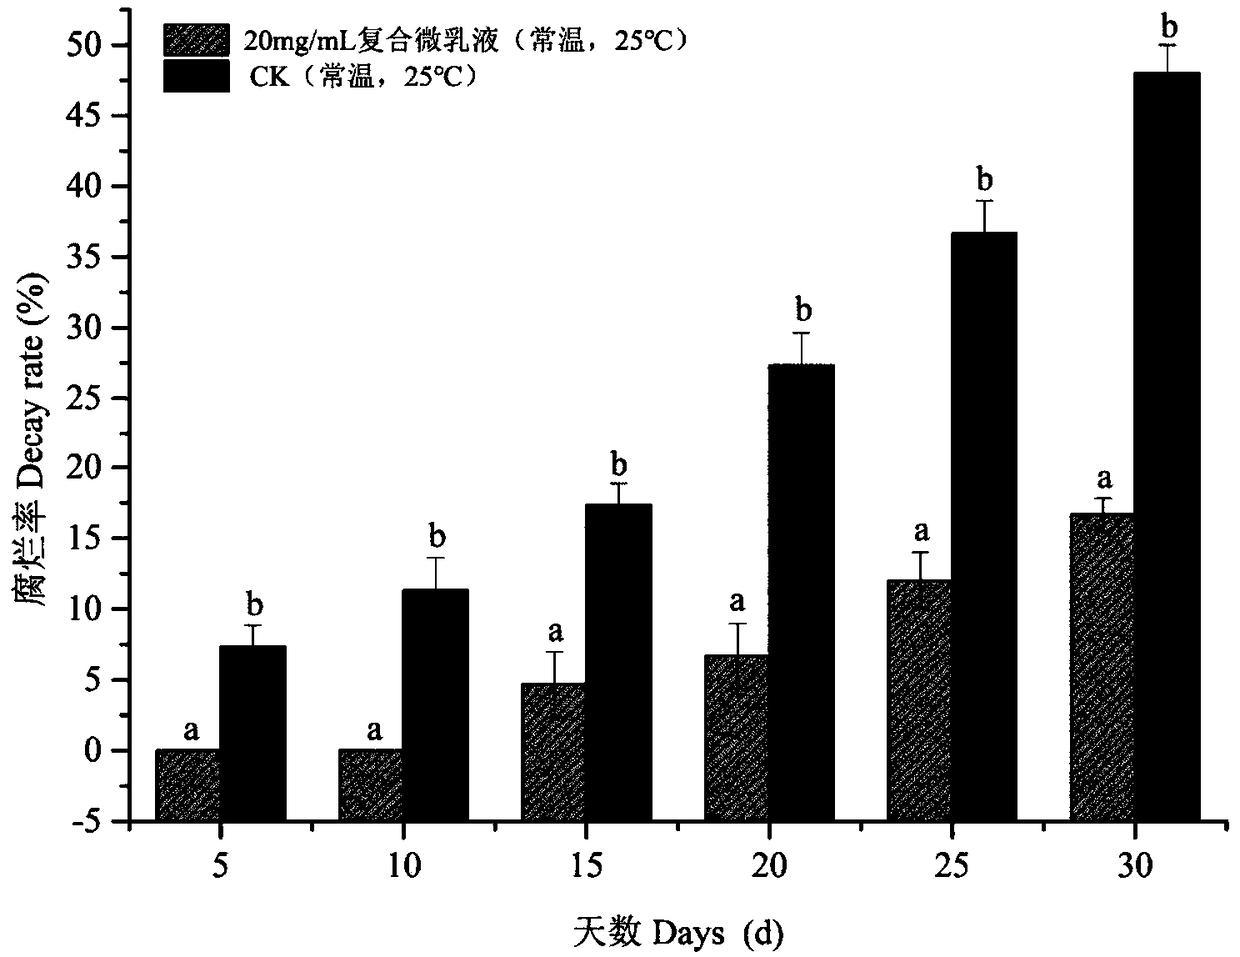 Fresh keeping agent composition for mandarins and preparation method of fresh keeping agent composition